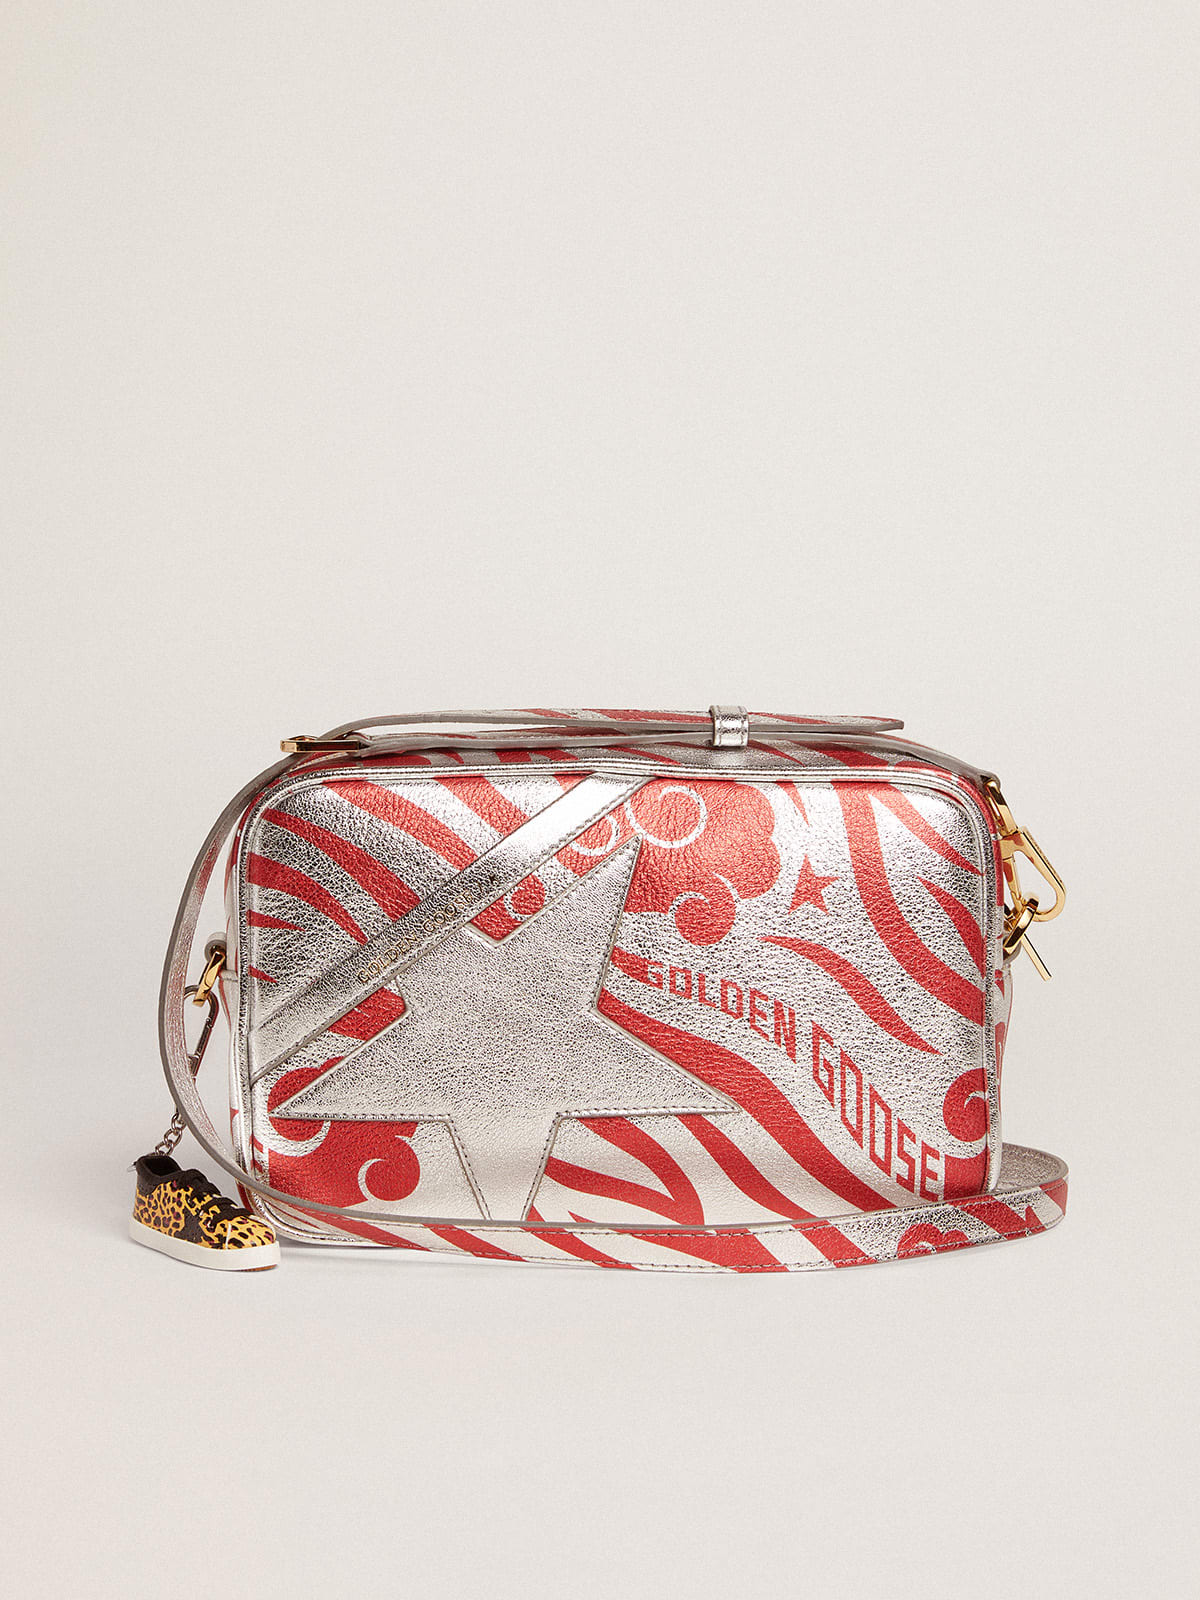 Golden Goose - Women's Star Bag in silver leather with star and tiger-striped CNY in 